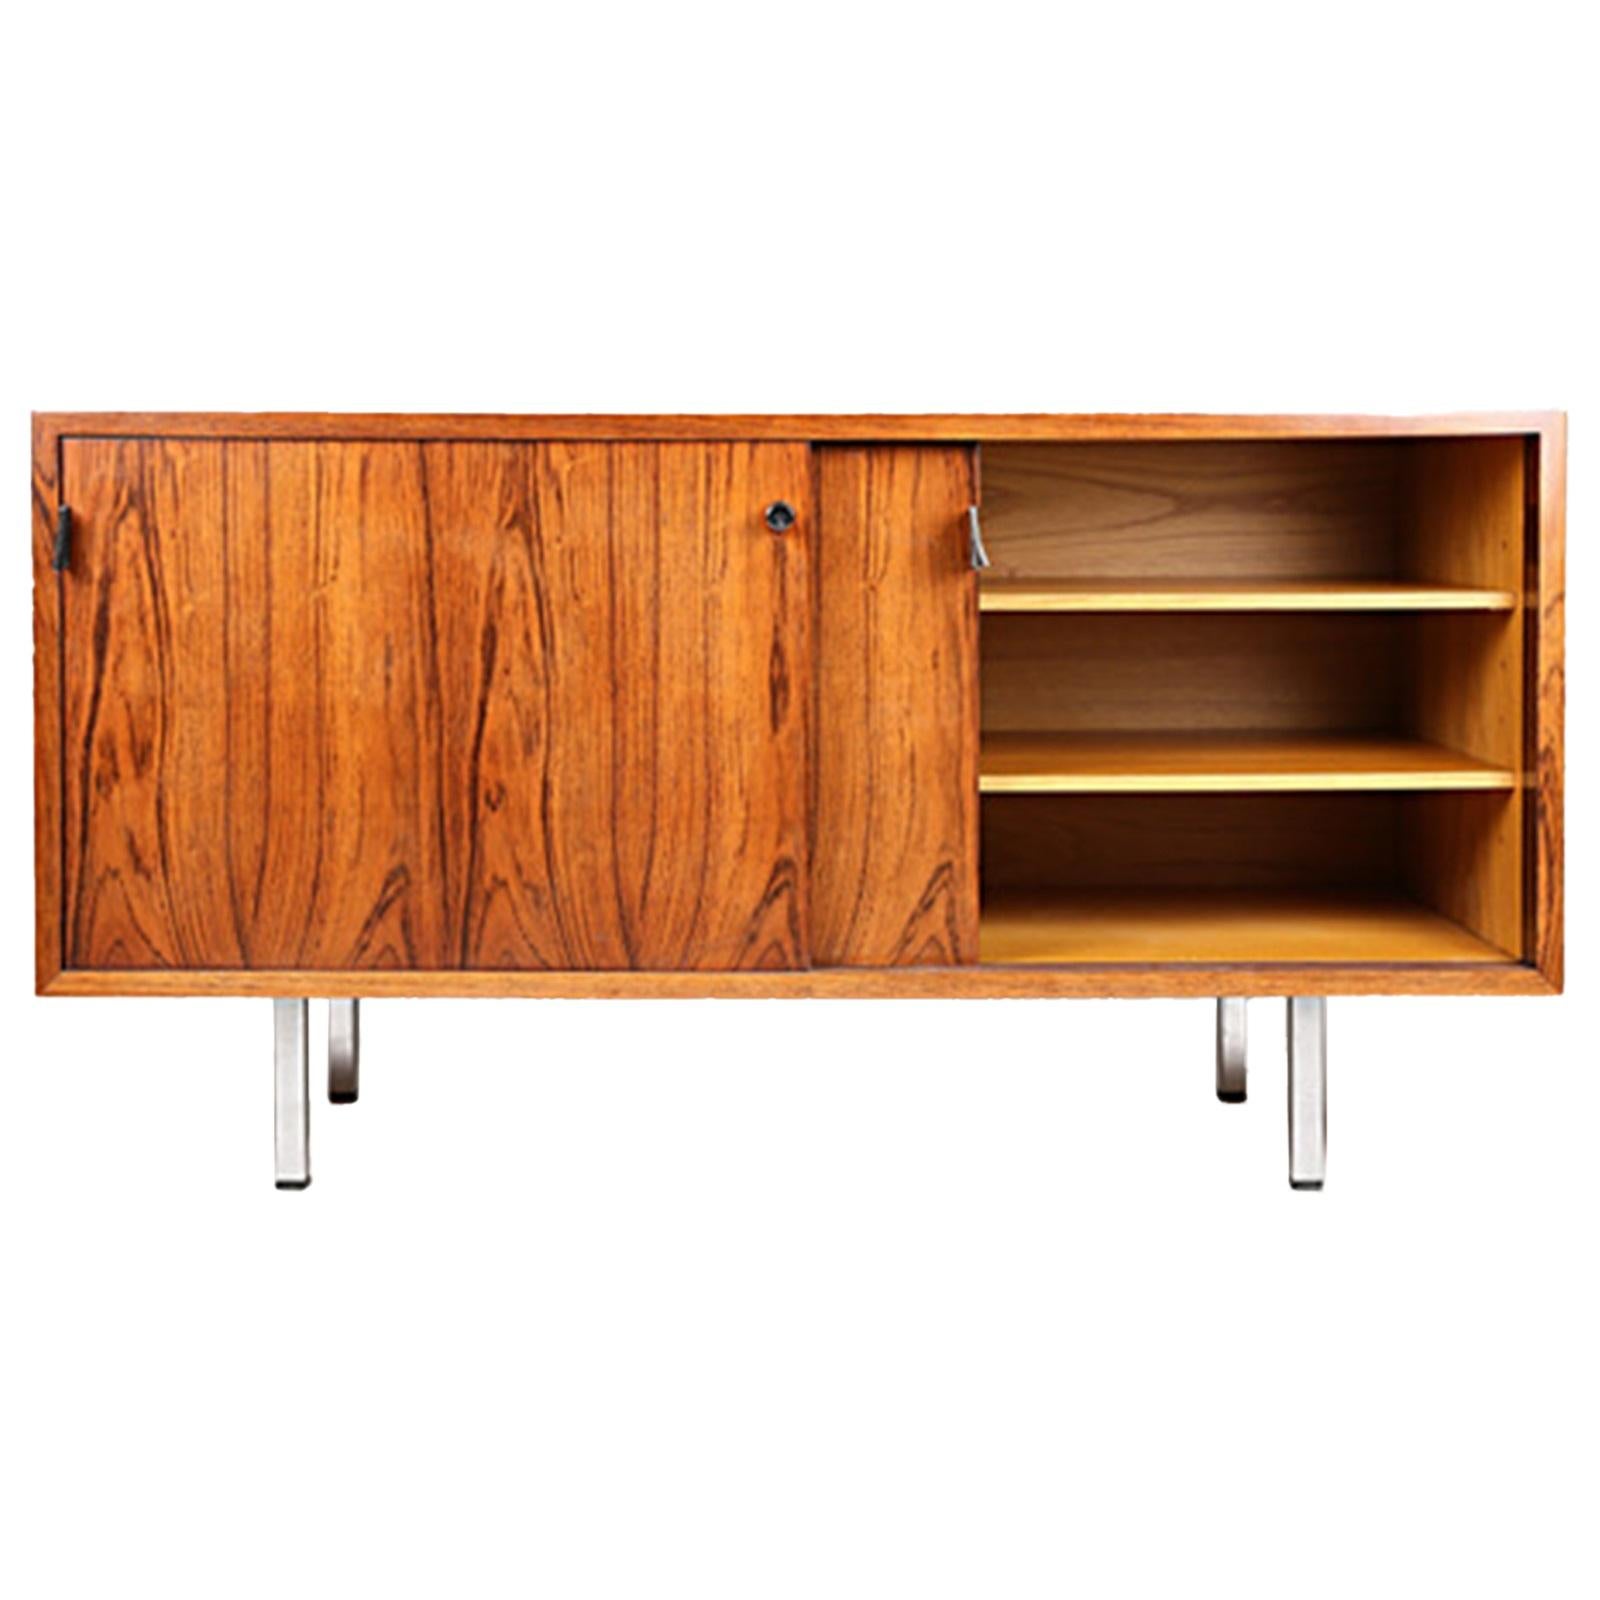 Knoll Florence (1917-2019) circa 1960
Office furniture in walnut and walnut veneer, it opens on the front with two leaves
sliding doors, leather pull straps, revealing two niches and four modular shelves.
It rests on four square section aluminum